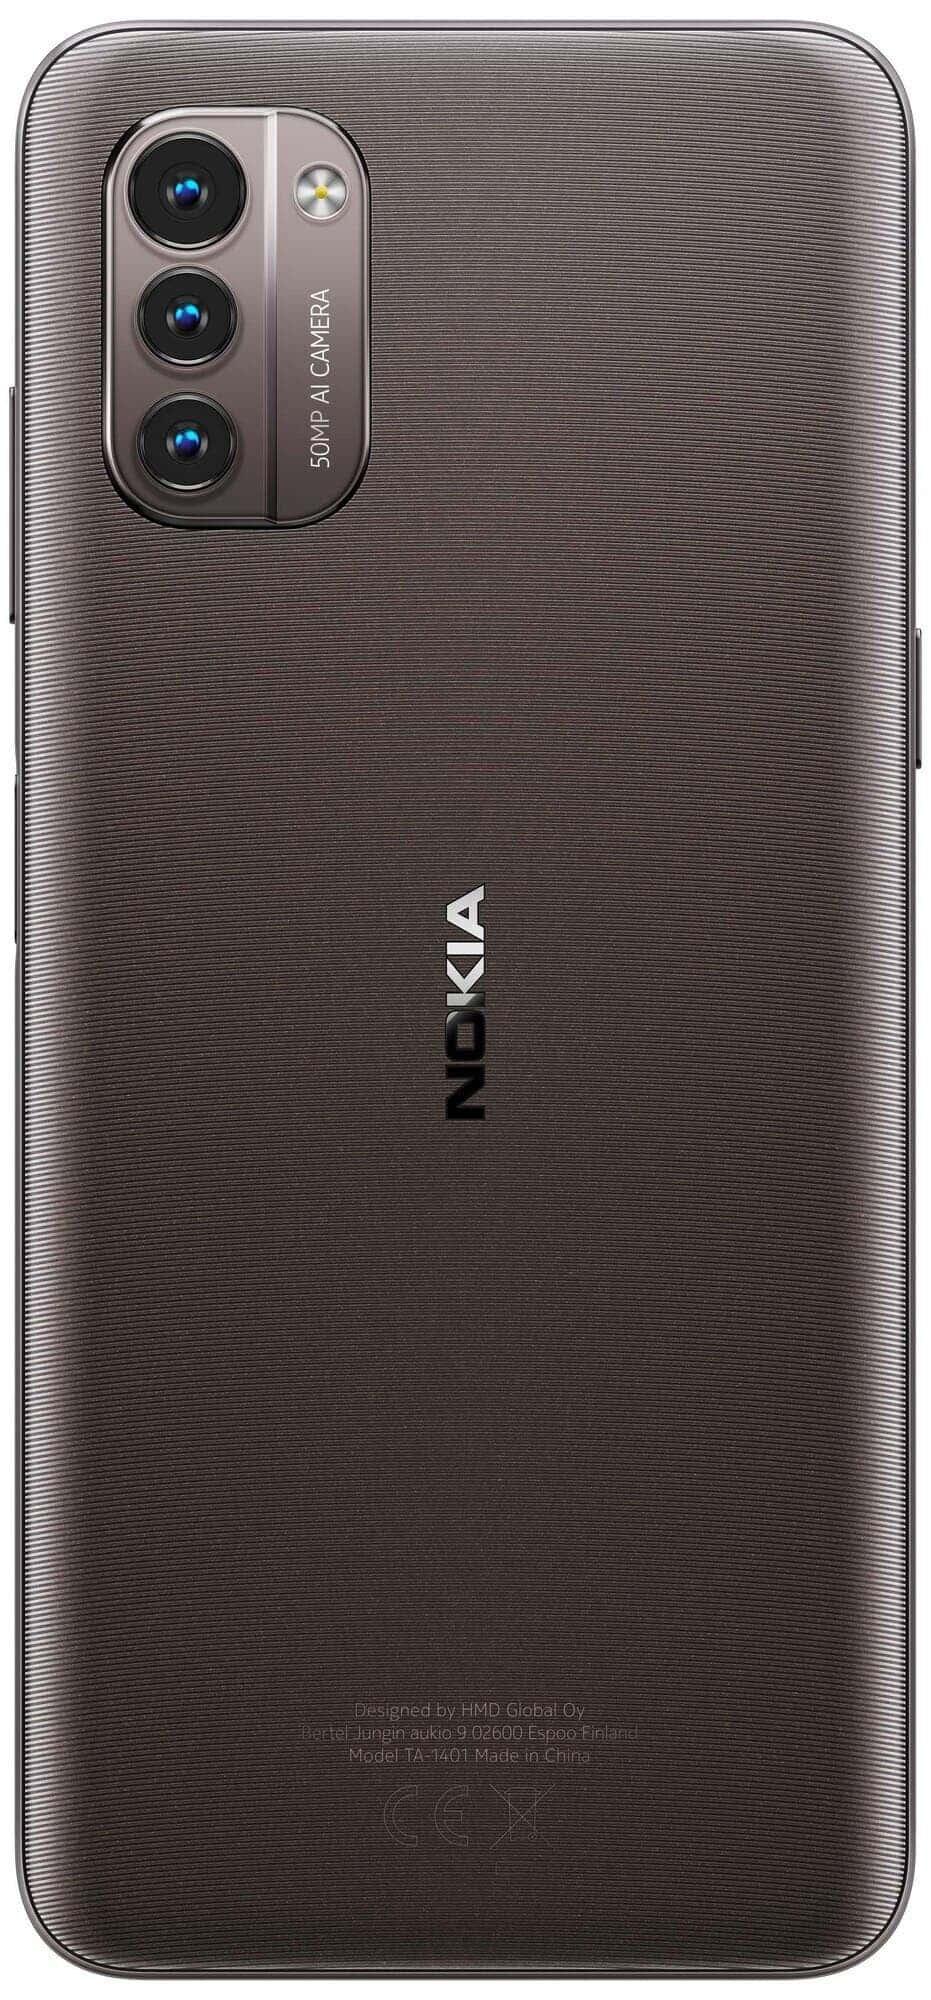 Nokia G11 and G21 to share same protective case 